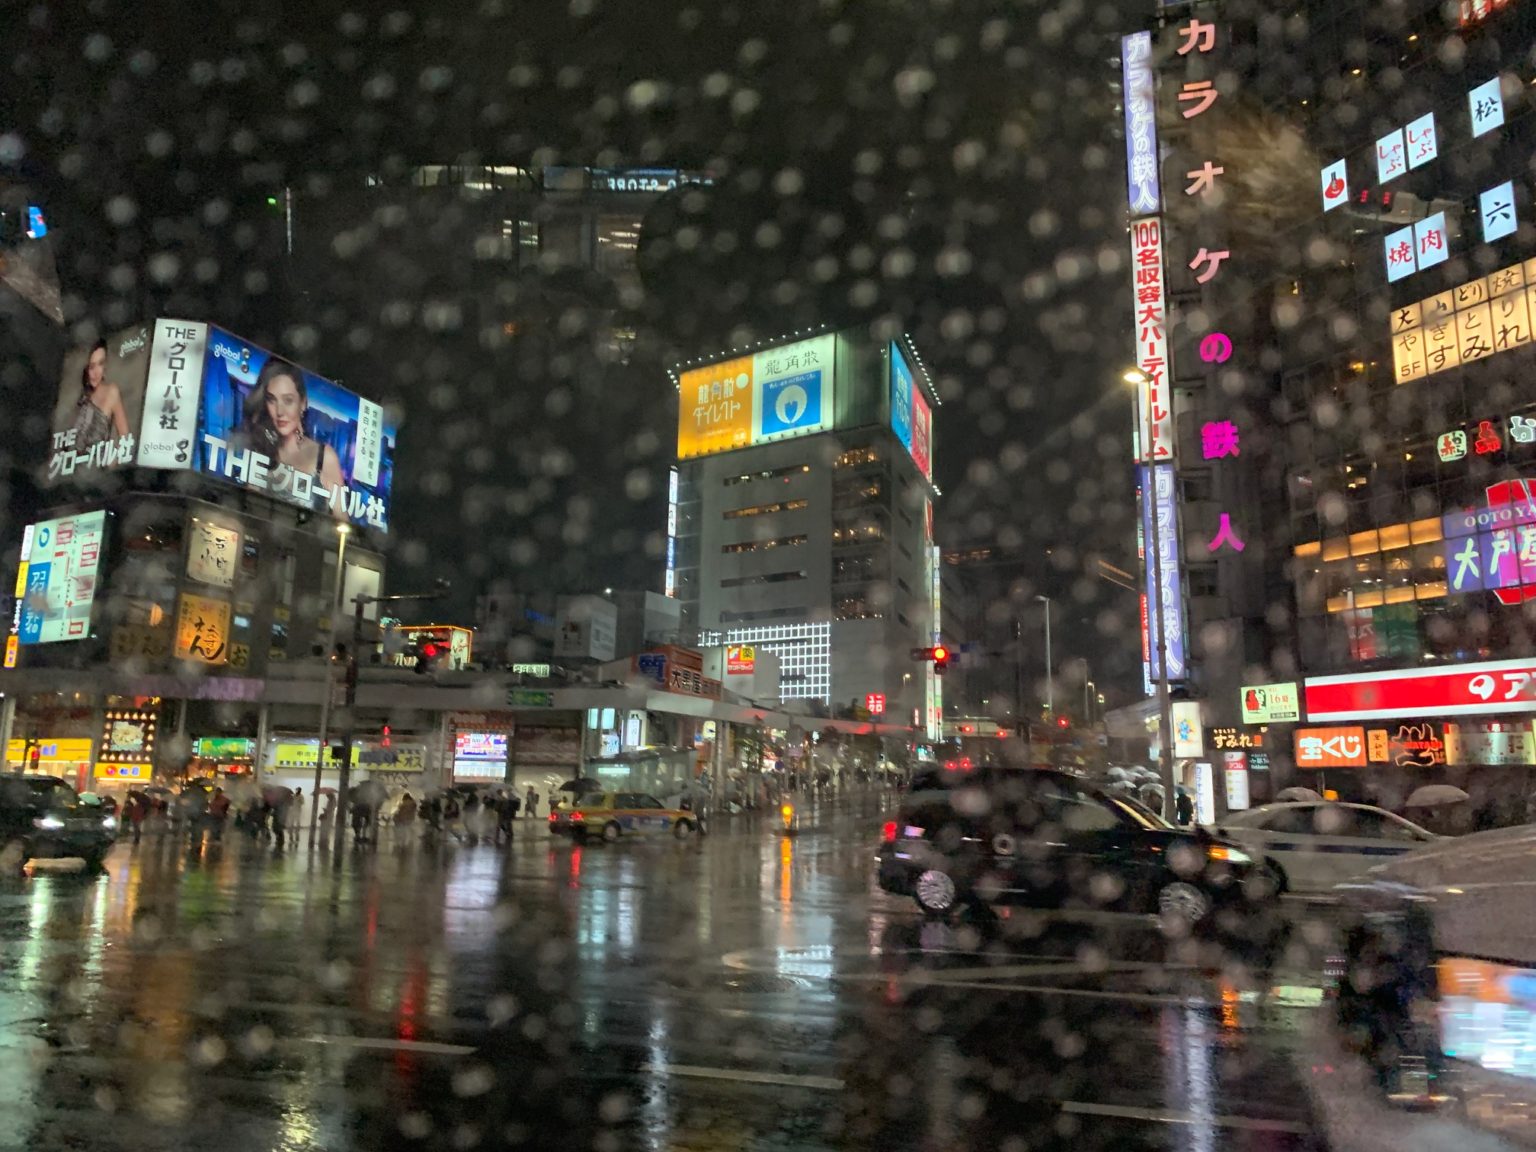 Our taxi view that rainy night